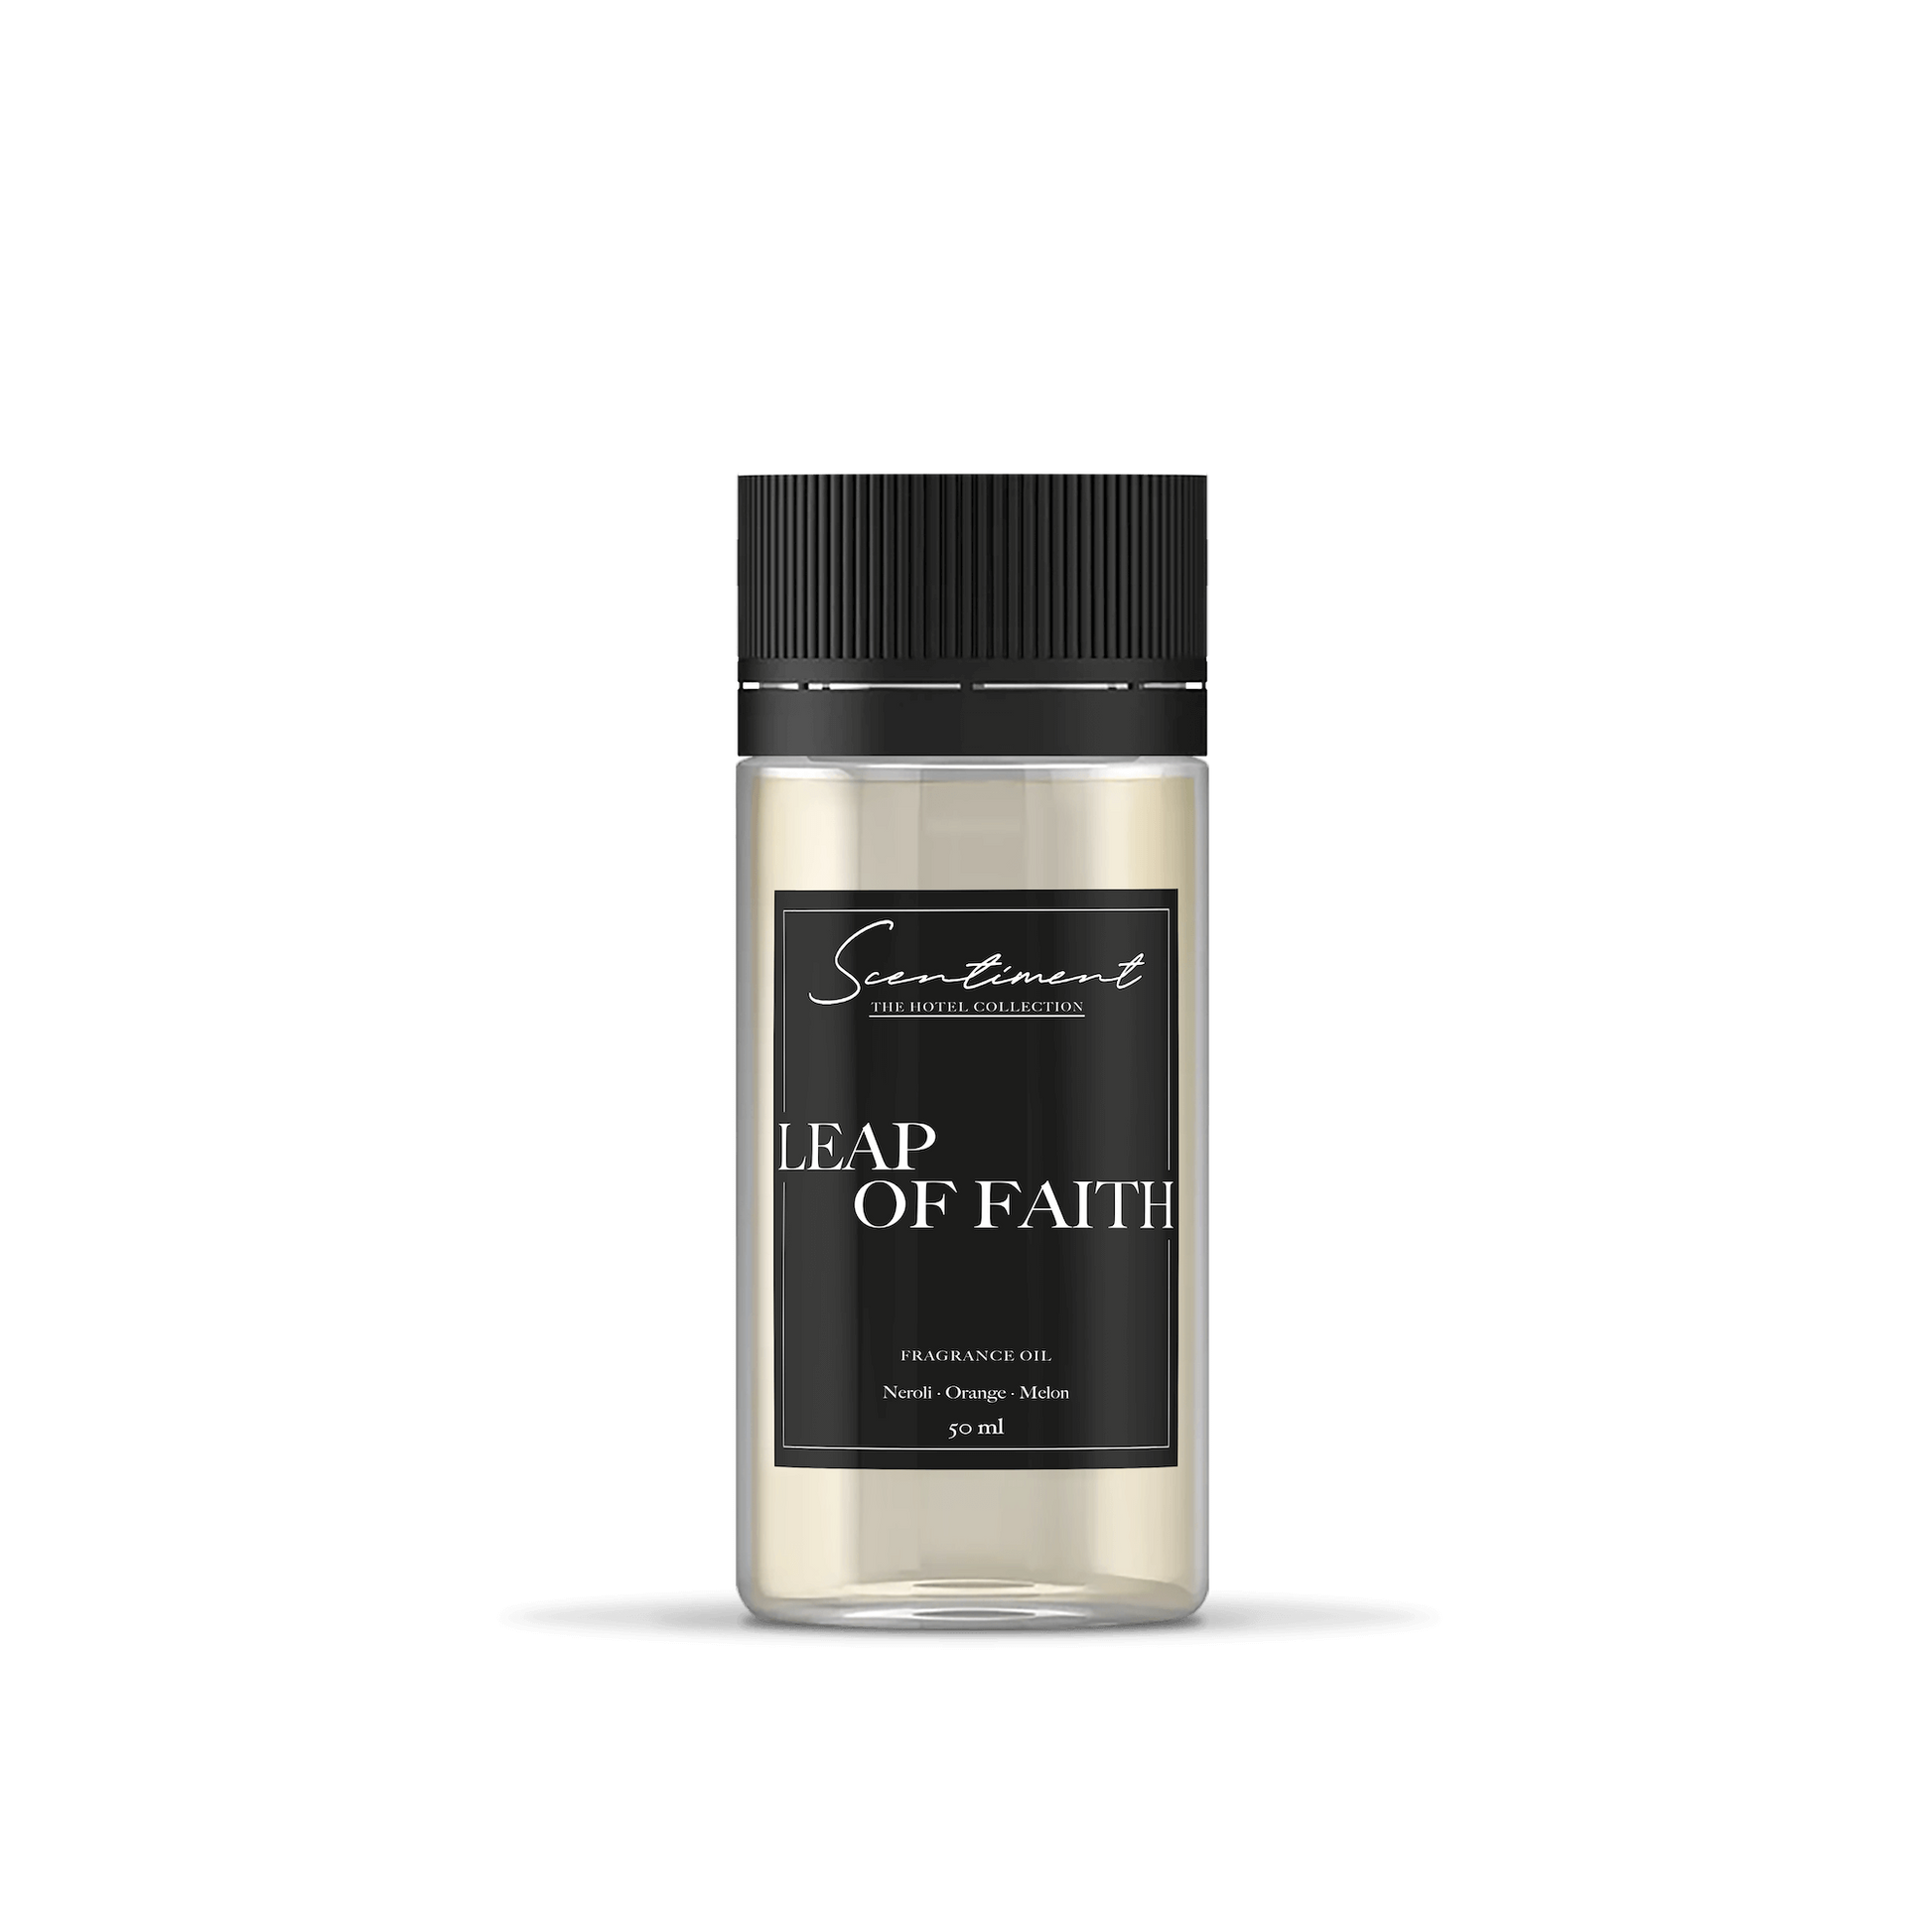 Leap of Faith Fragrance Oil inspired by Atlantis® Hotel, with notes of Neroli, Orange, and Melon